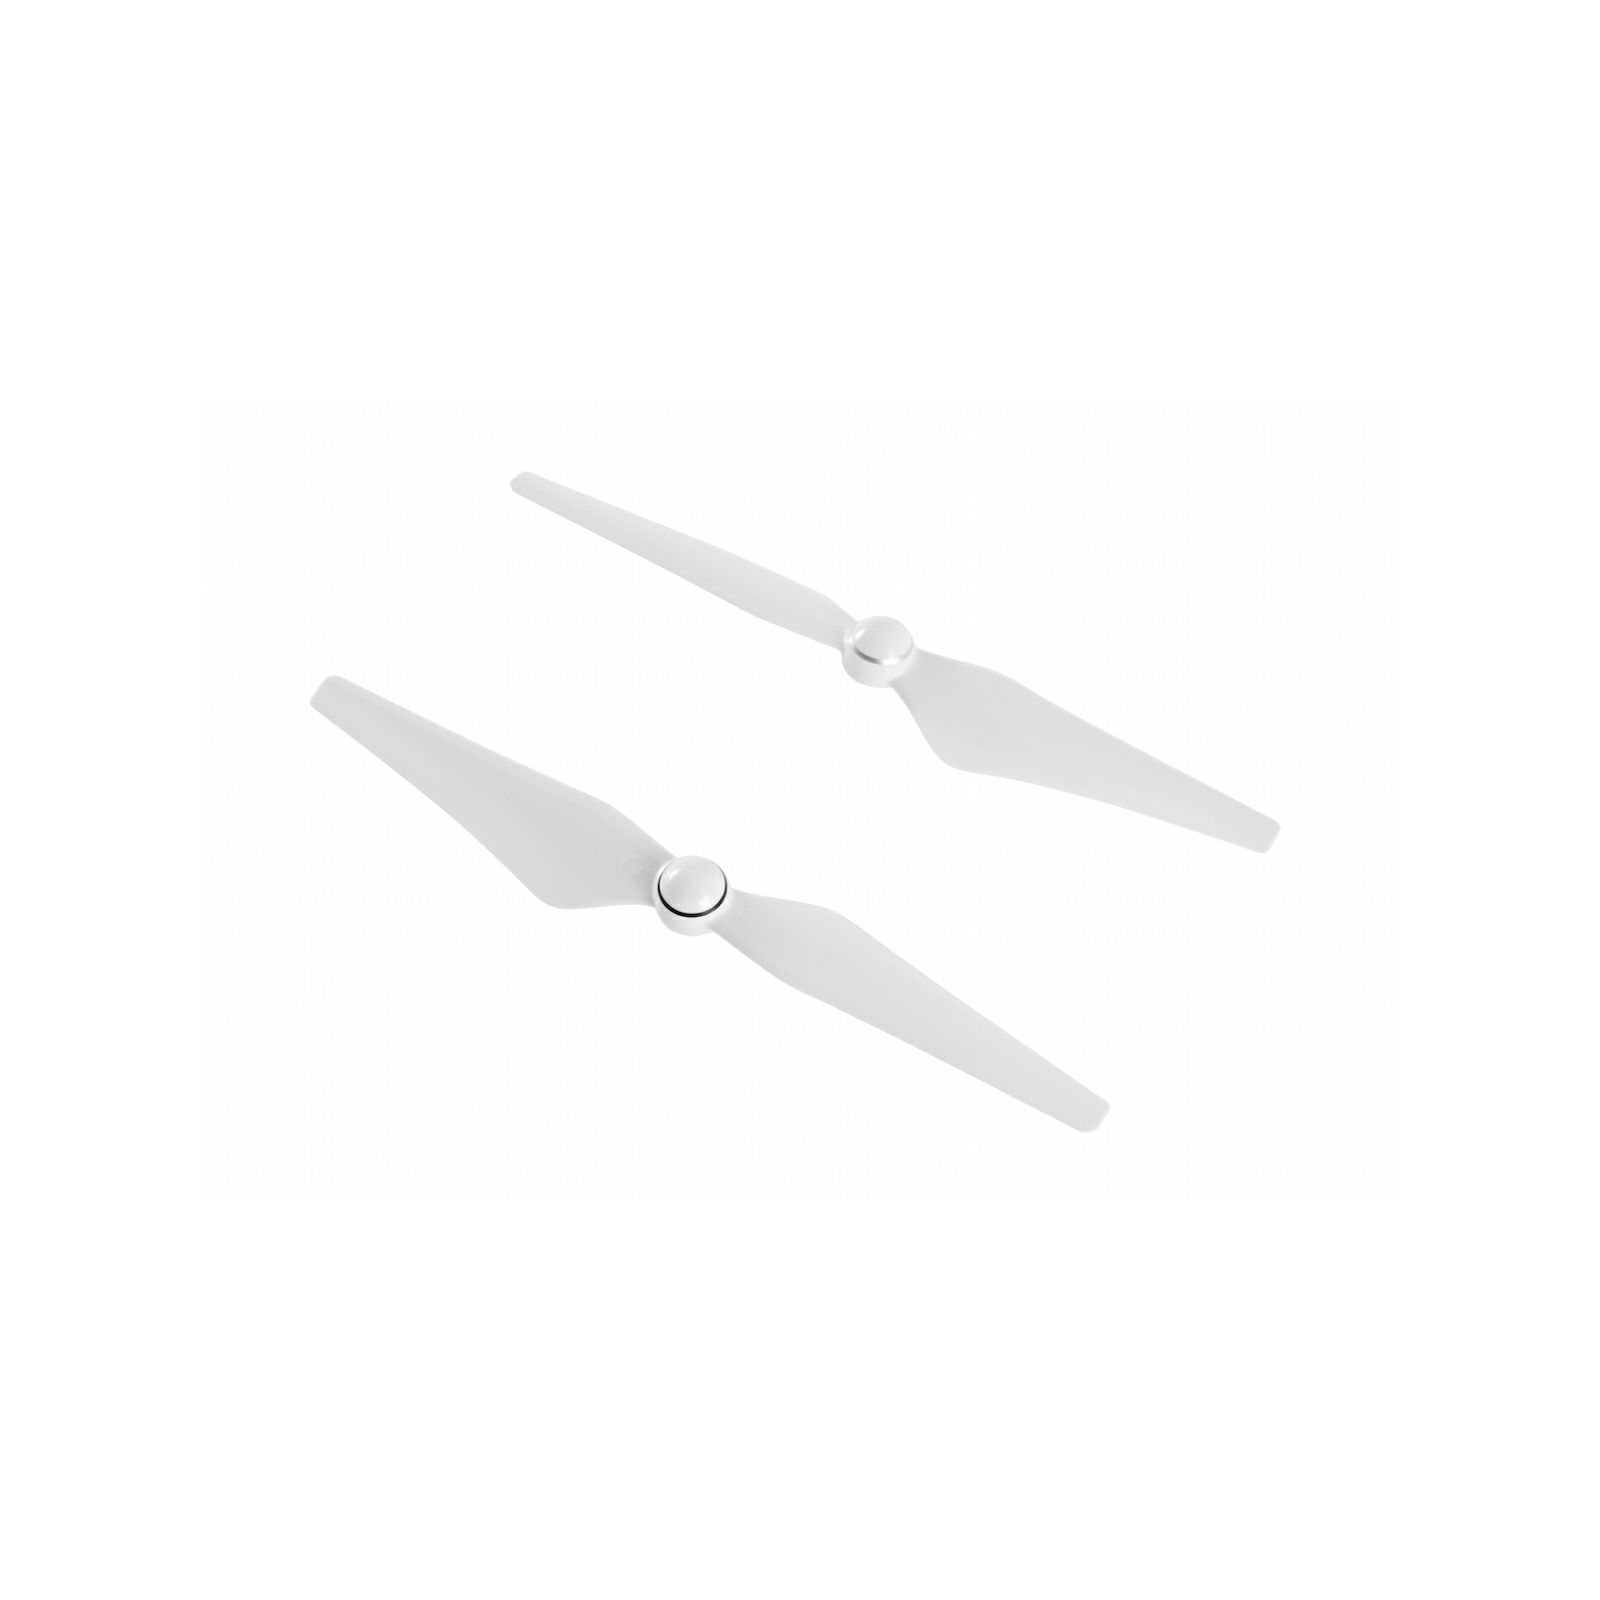 DJI Phantom 4 Spare Part 25 9450S Quick Release Propellers (1CW+1CCW)